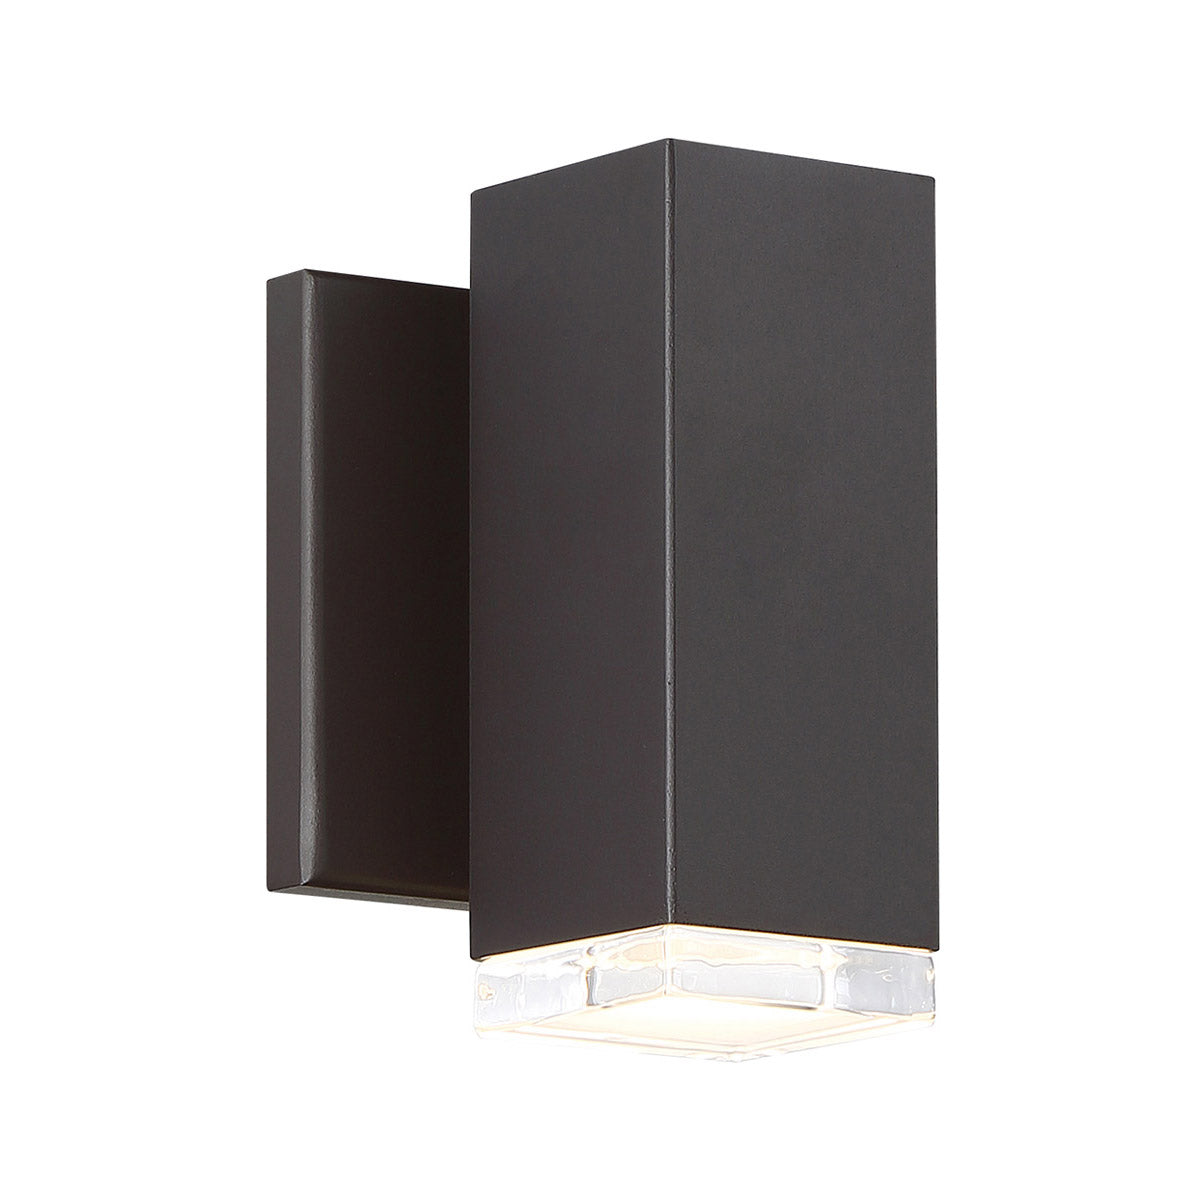 Block 6 in. LED Outdoor Wall Sconce 3000K